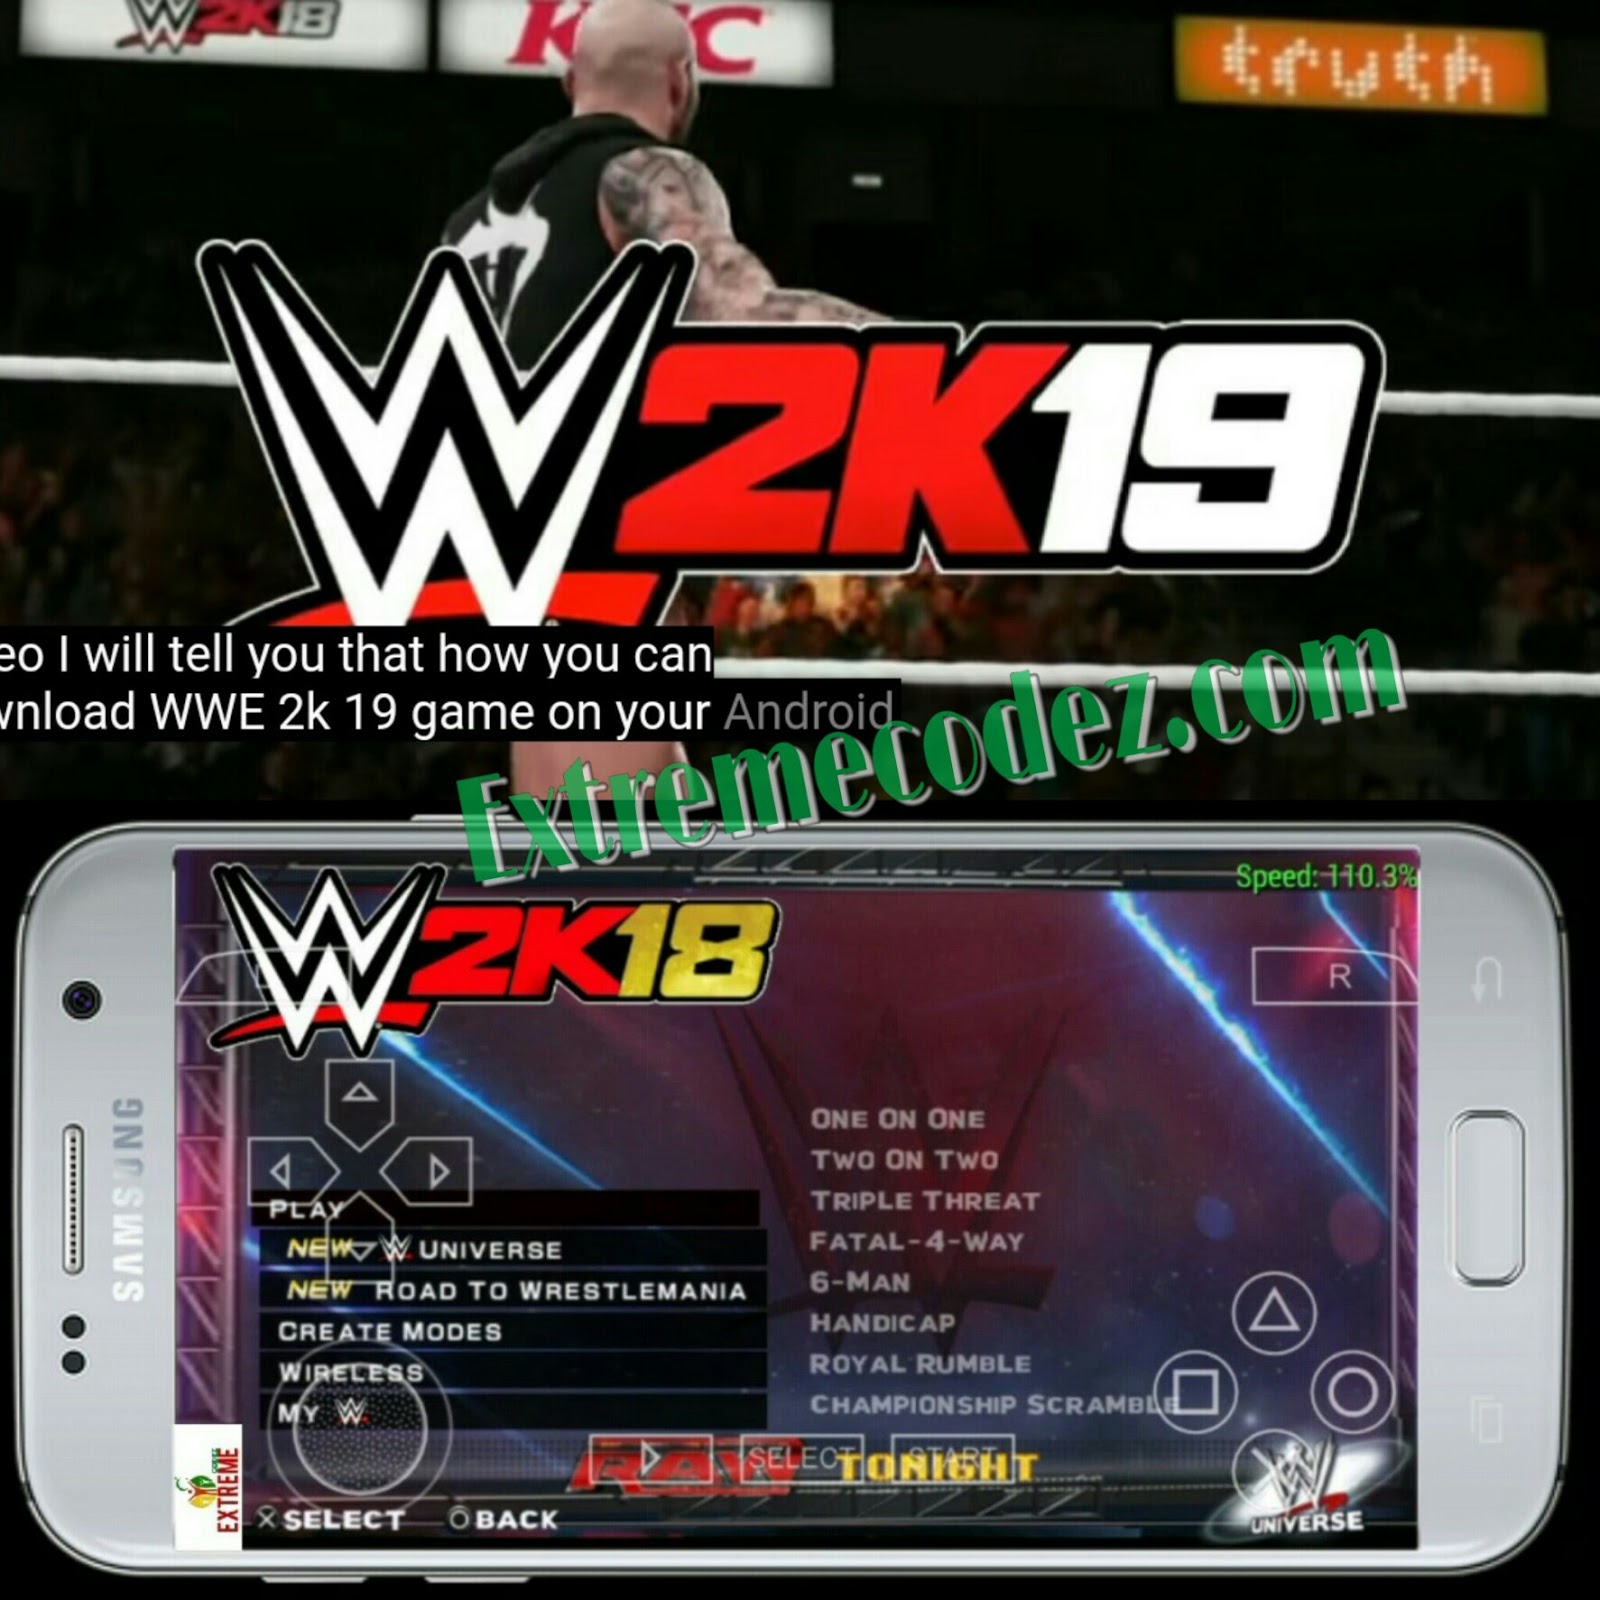 Wwe 2k18 ppsspp iso download file size 1.2 gb